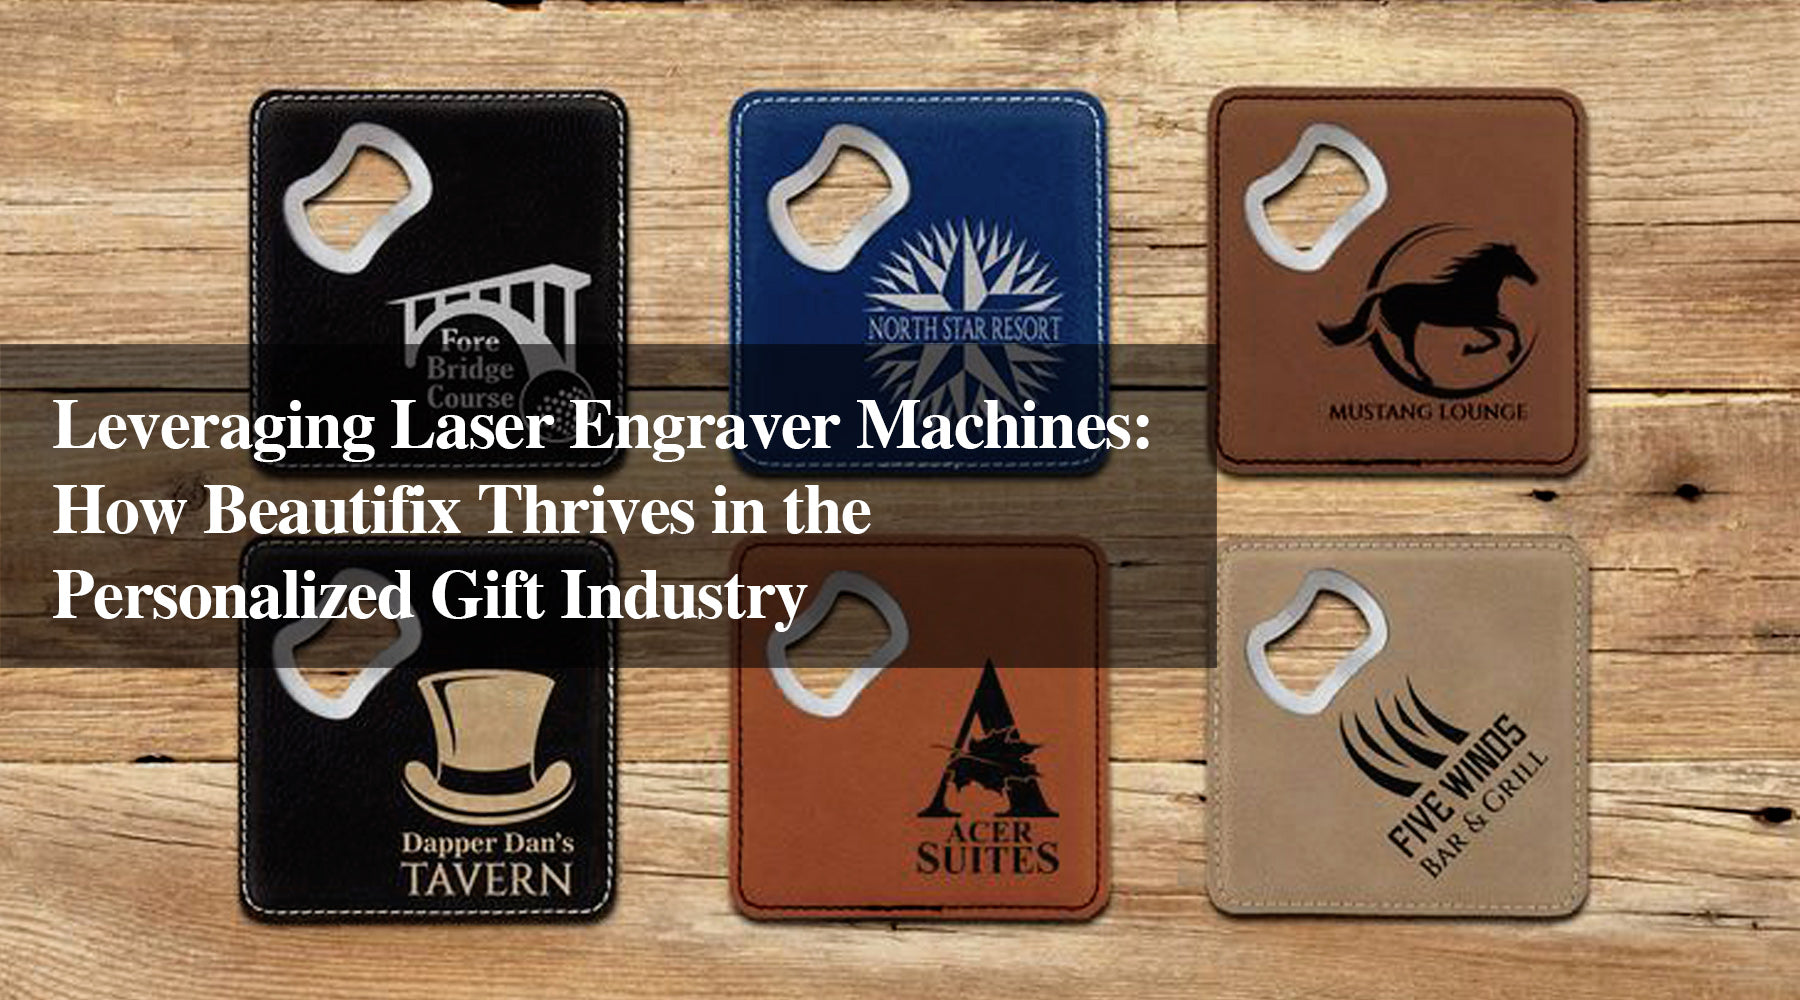 Leveraging Laser Engraver Machines: How Beautifix Thrives in the Personalized Gift Industry